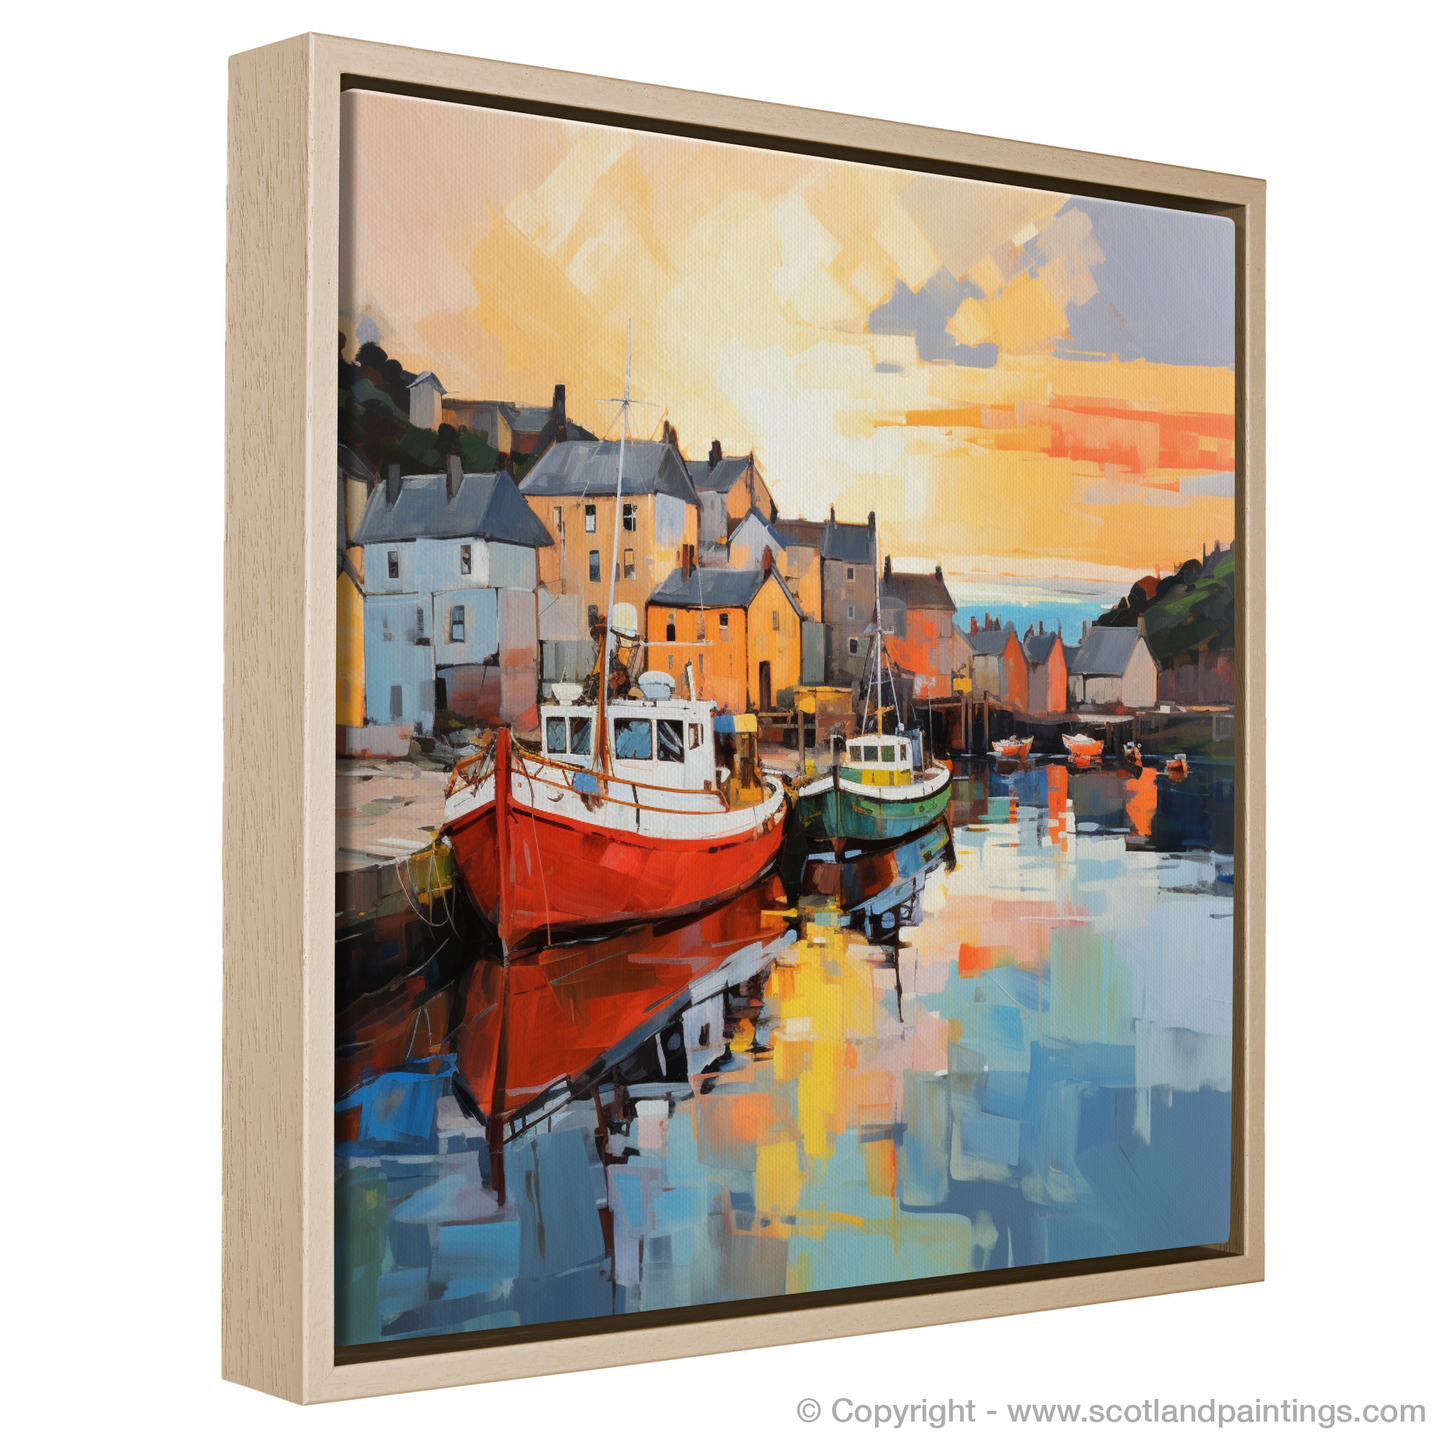 Painting and Art Print of Millport Harbour at golden hour entitled "Millport Harbour at Golden Hour: An Expressionist Tribute".